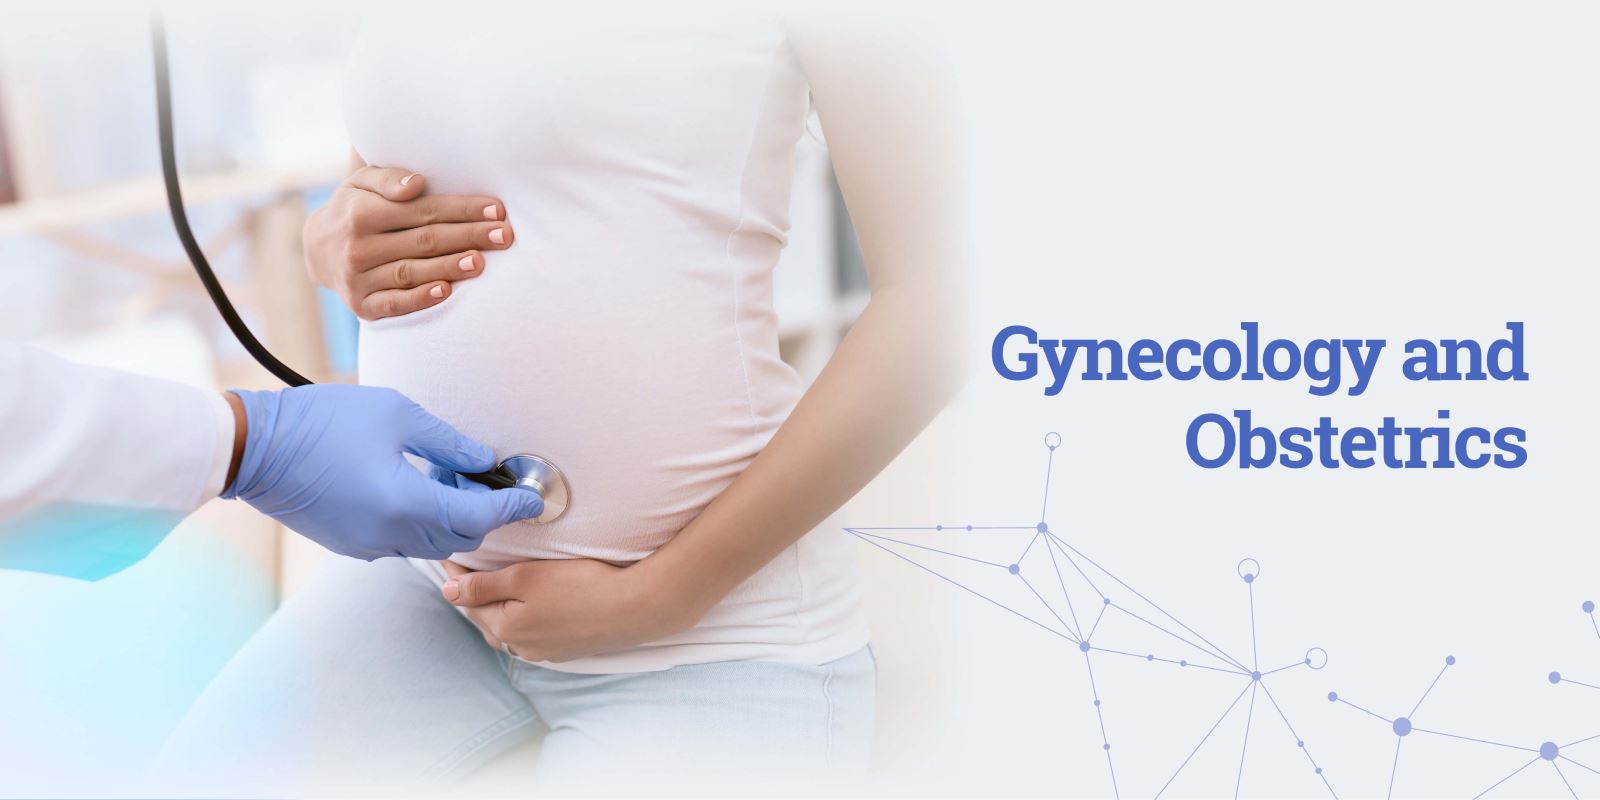 Journal of Clinical Obstetrics & Gynecology - Q4 (Special issue)